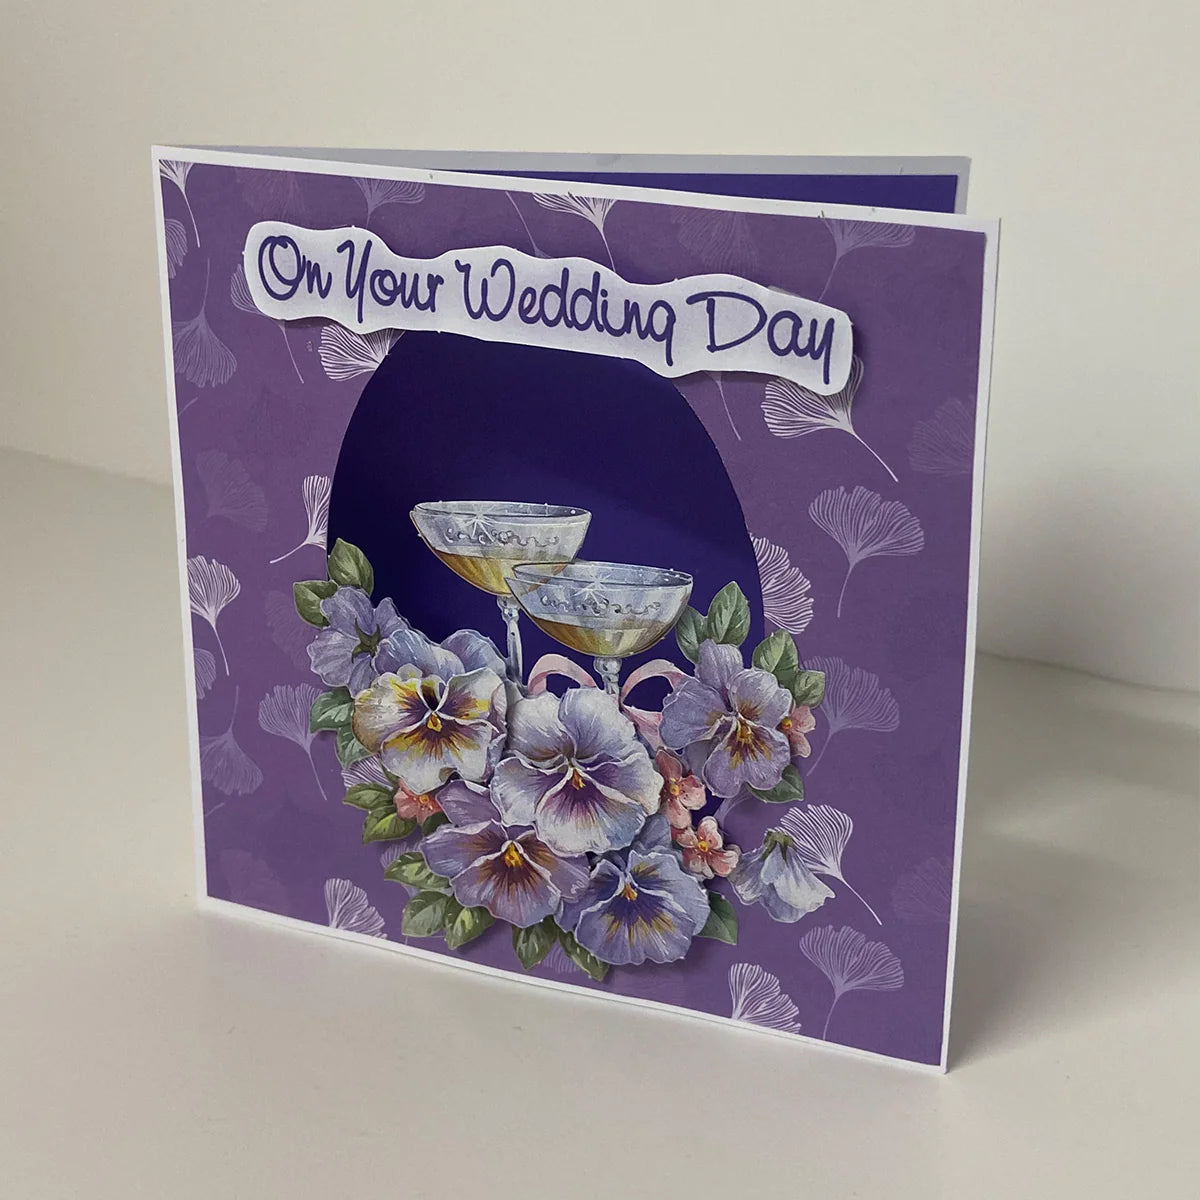 Die Cut Decoupage – Champagne And Violets (Pack Of 3)